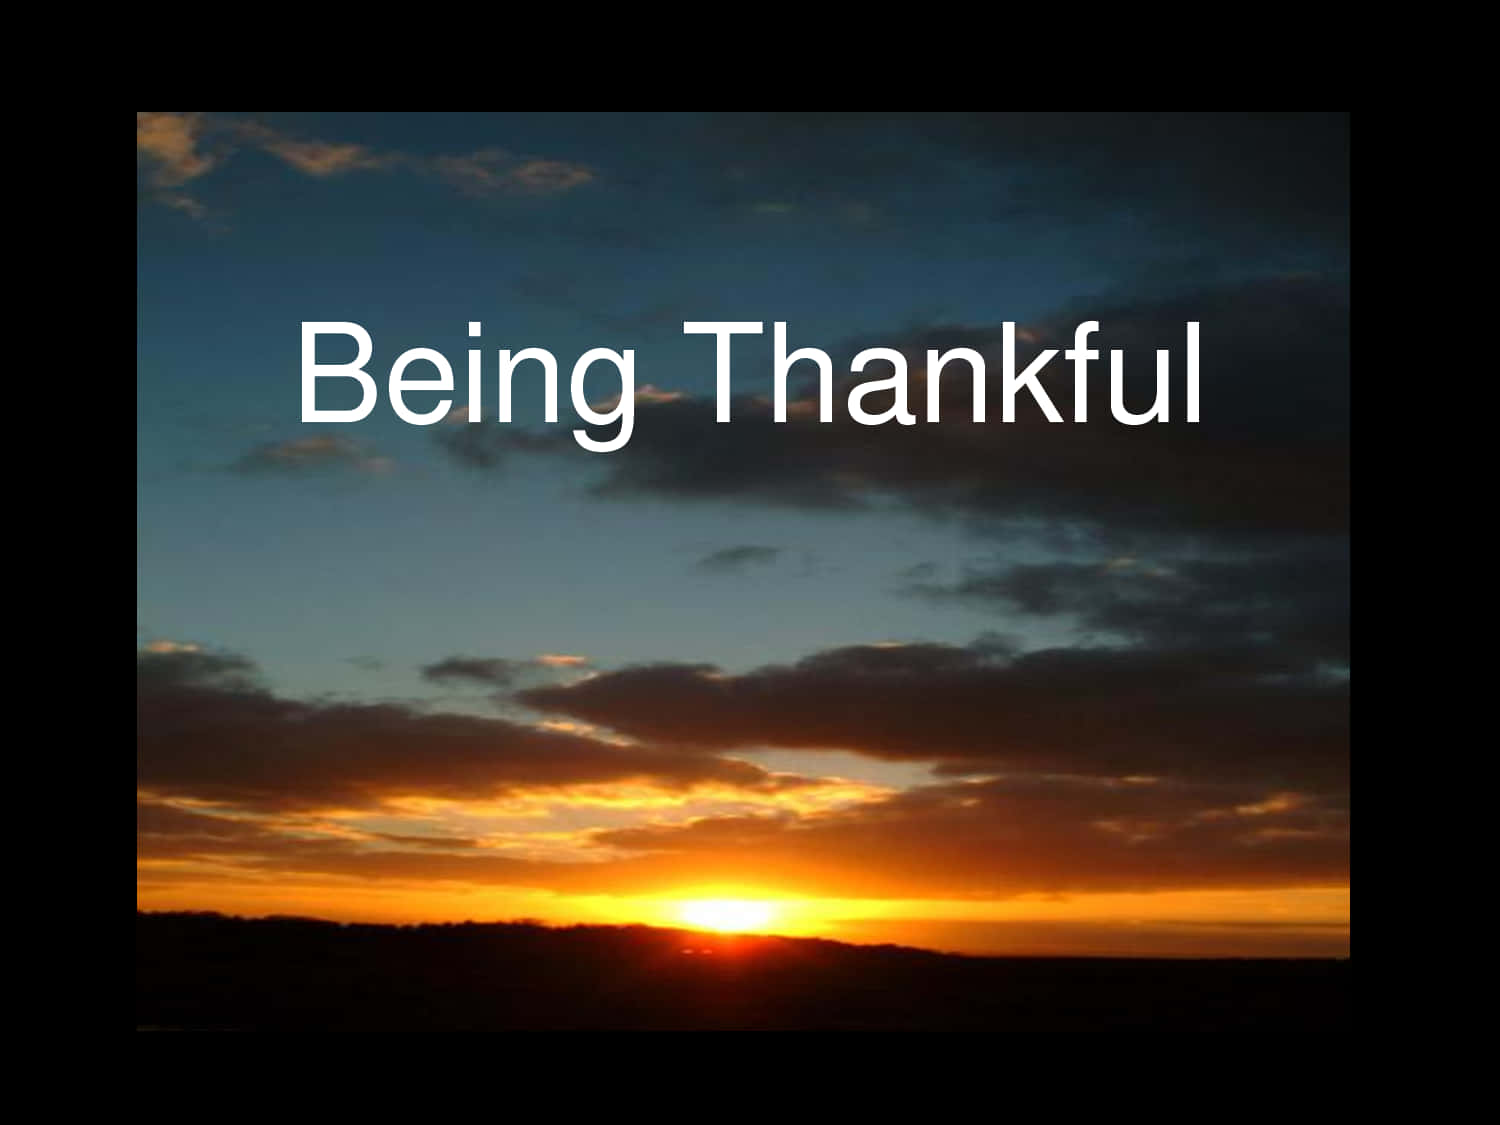 Giving Thanks for All